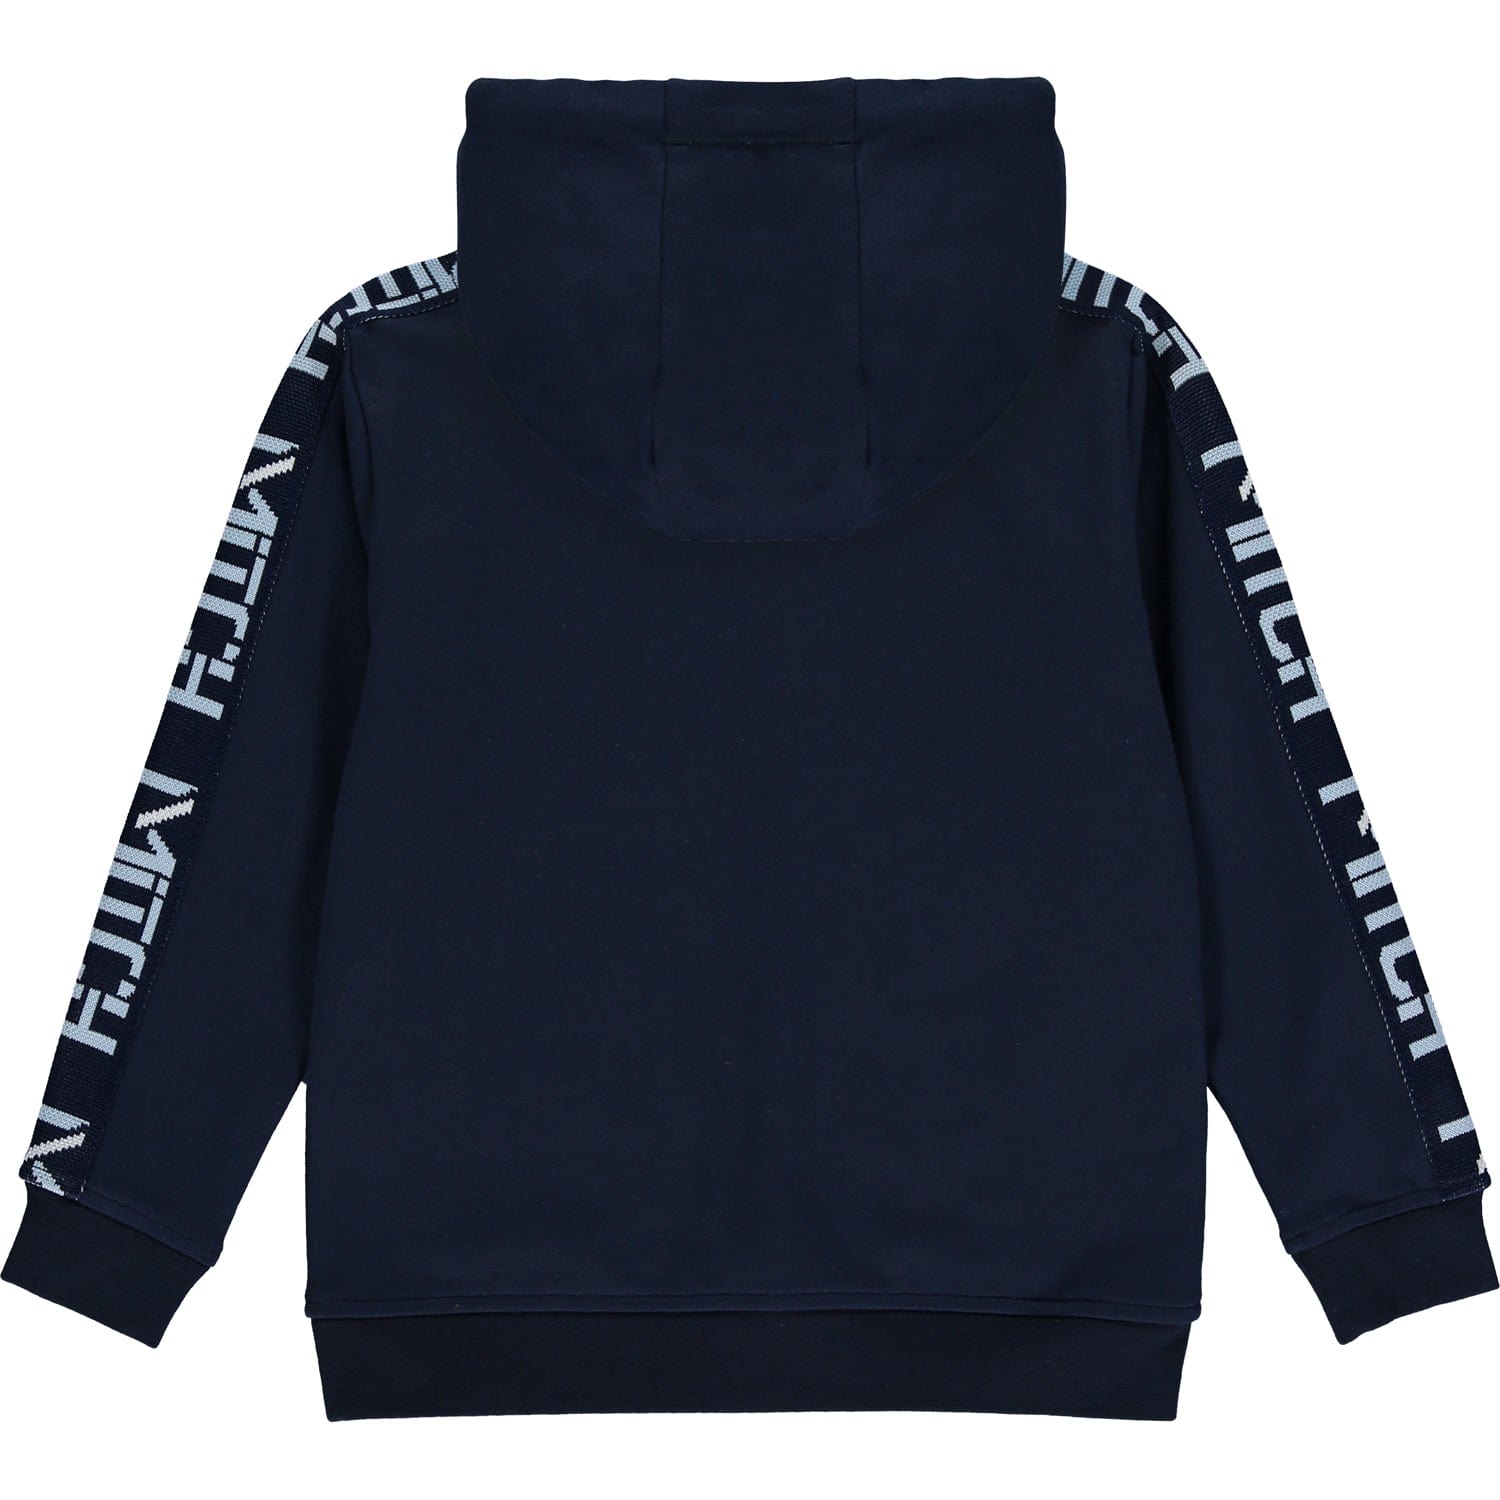 MITCH - Hamilton Hooded Tape Tracksuit - Blue Navy